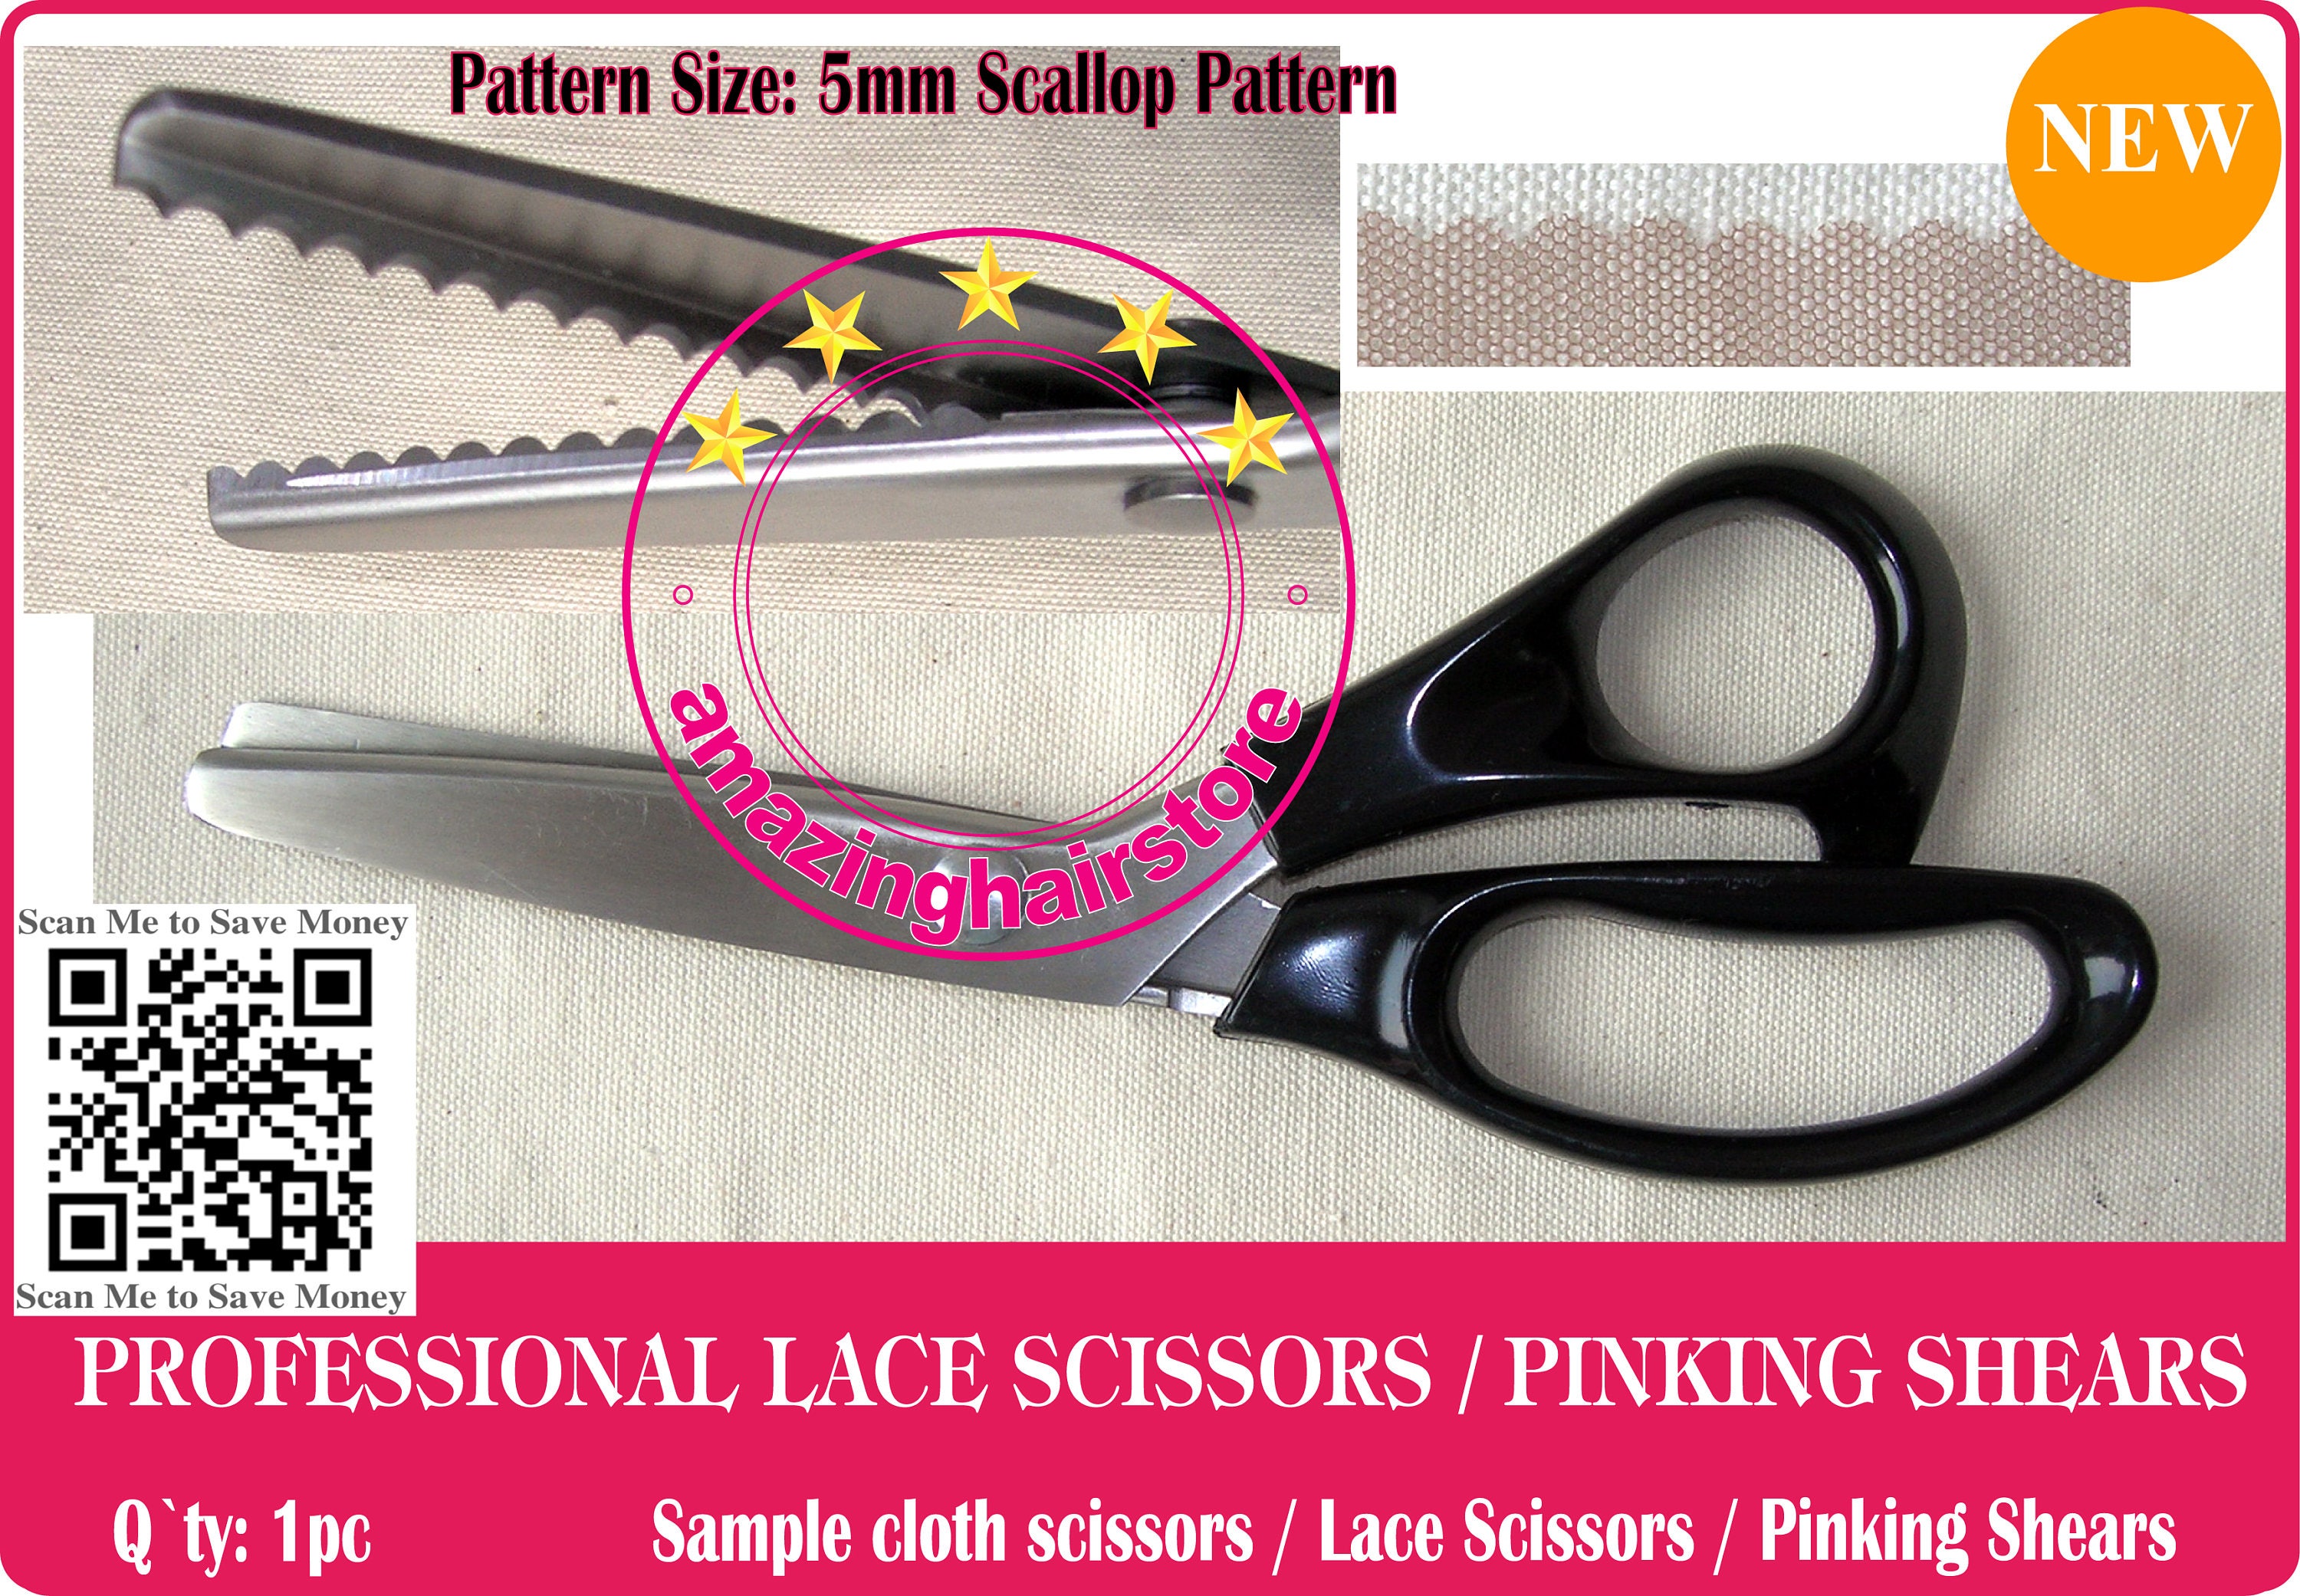 Charmers cosmetics - Ventilating Needles and Lace Mesh now available. Make  your own Closures and Lace Front wigs with these tool kit.